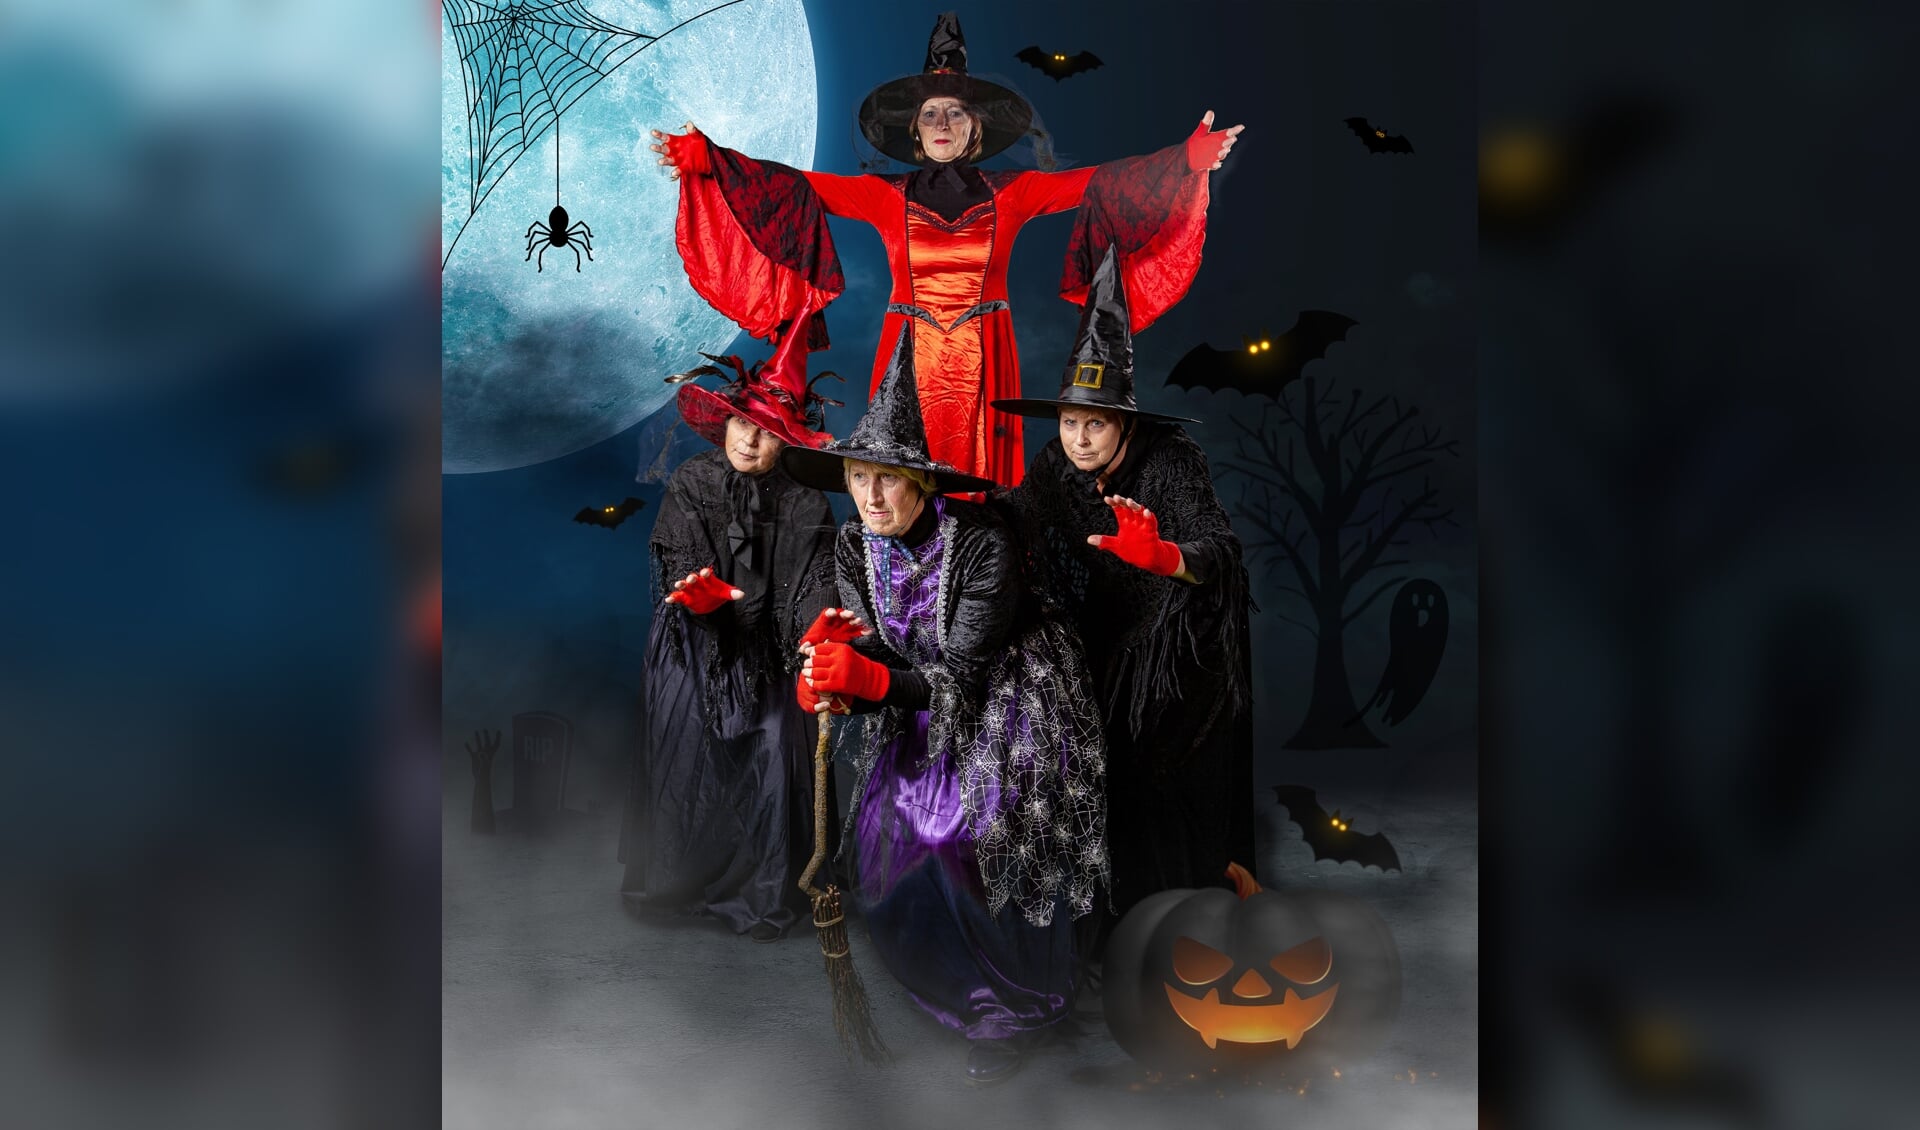 halloween background concept, backgrounds night sky with full moon and clouds. Elements of this image furnished by NASA